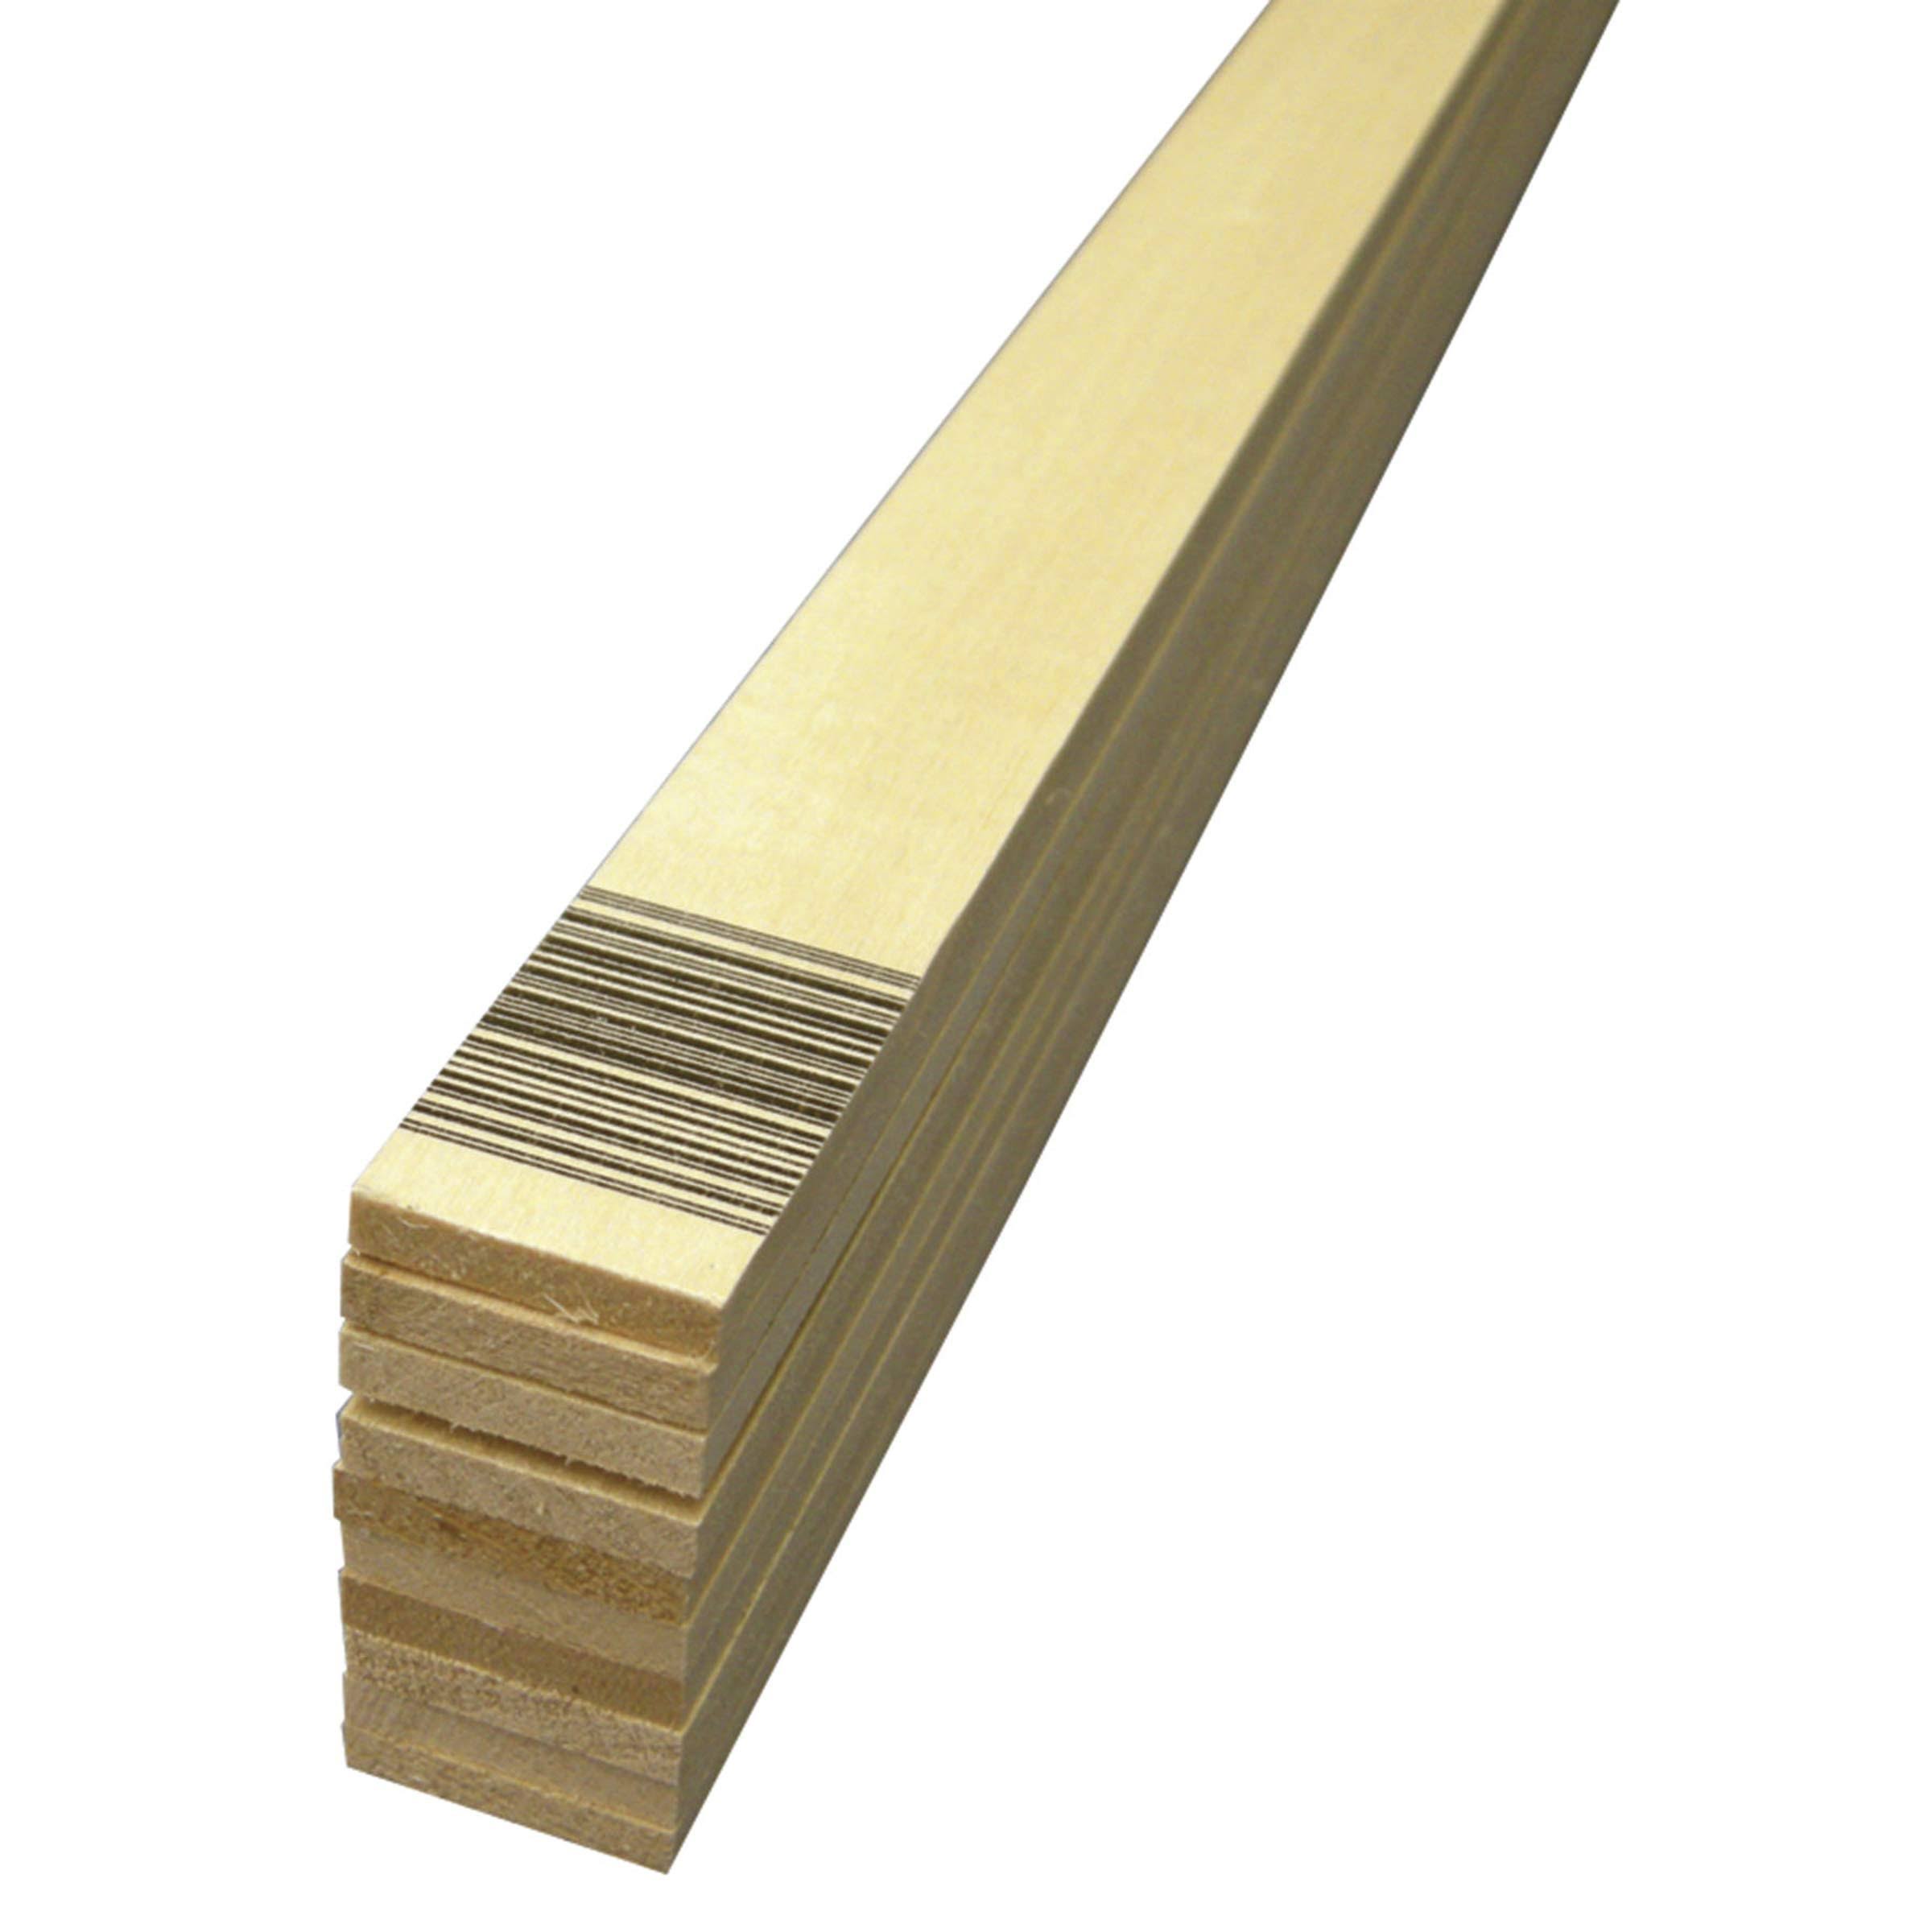 Midwest Basswood 3/16x1x24" (10)